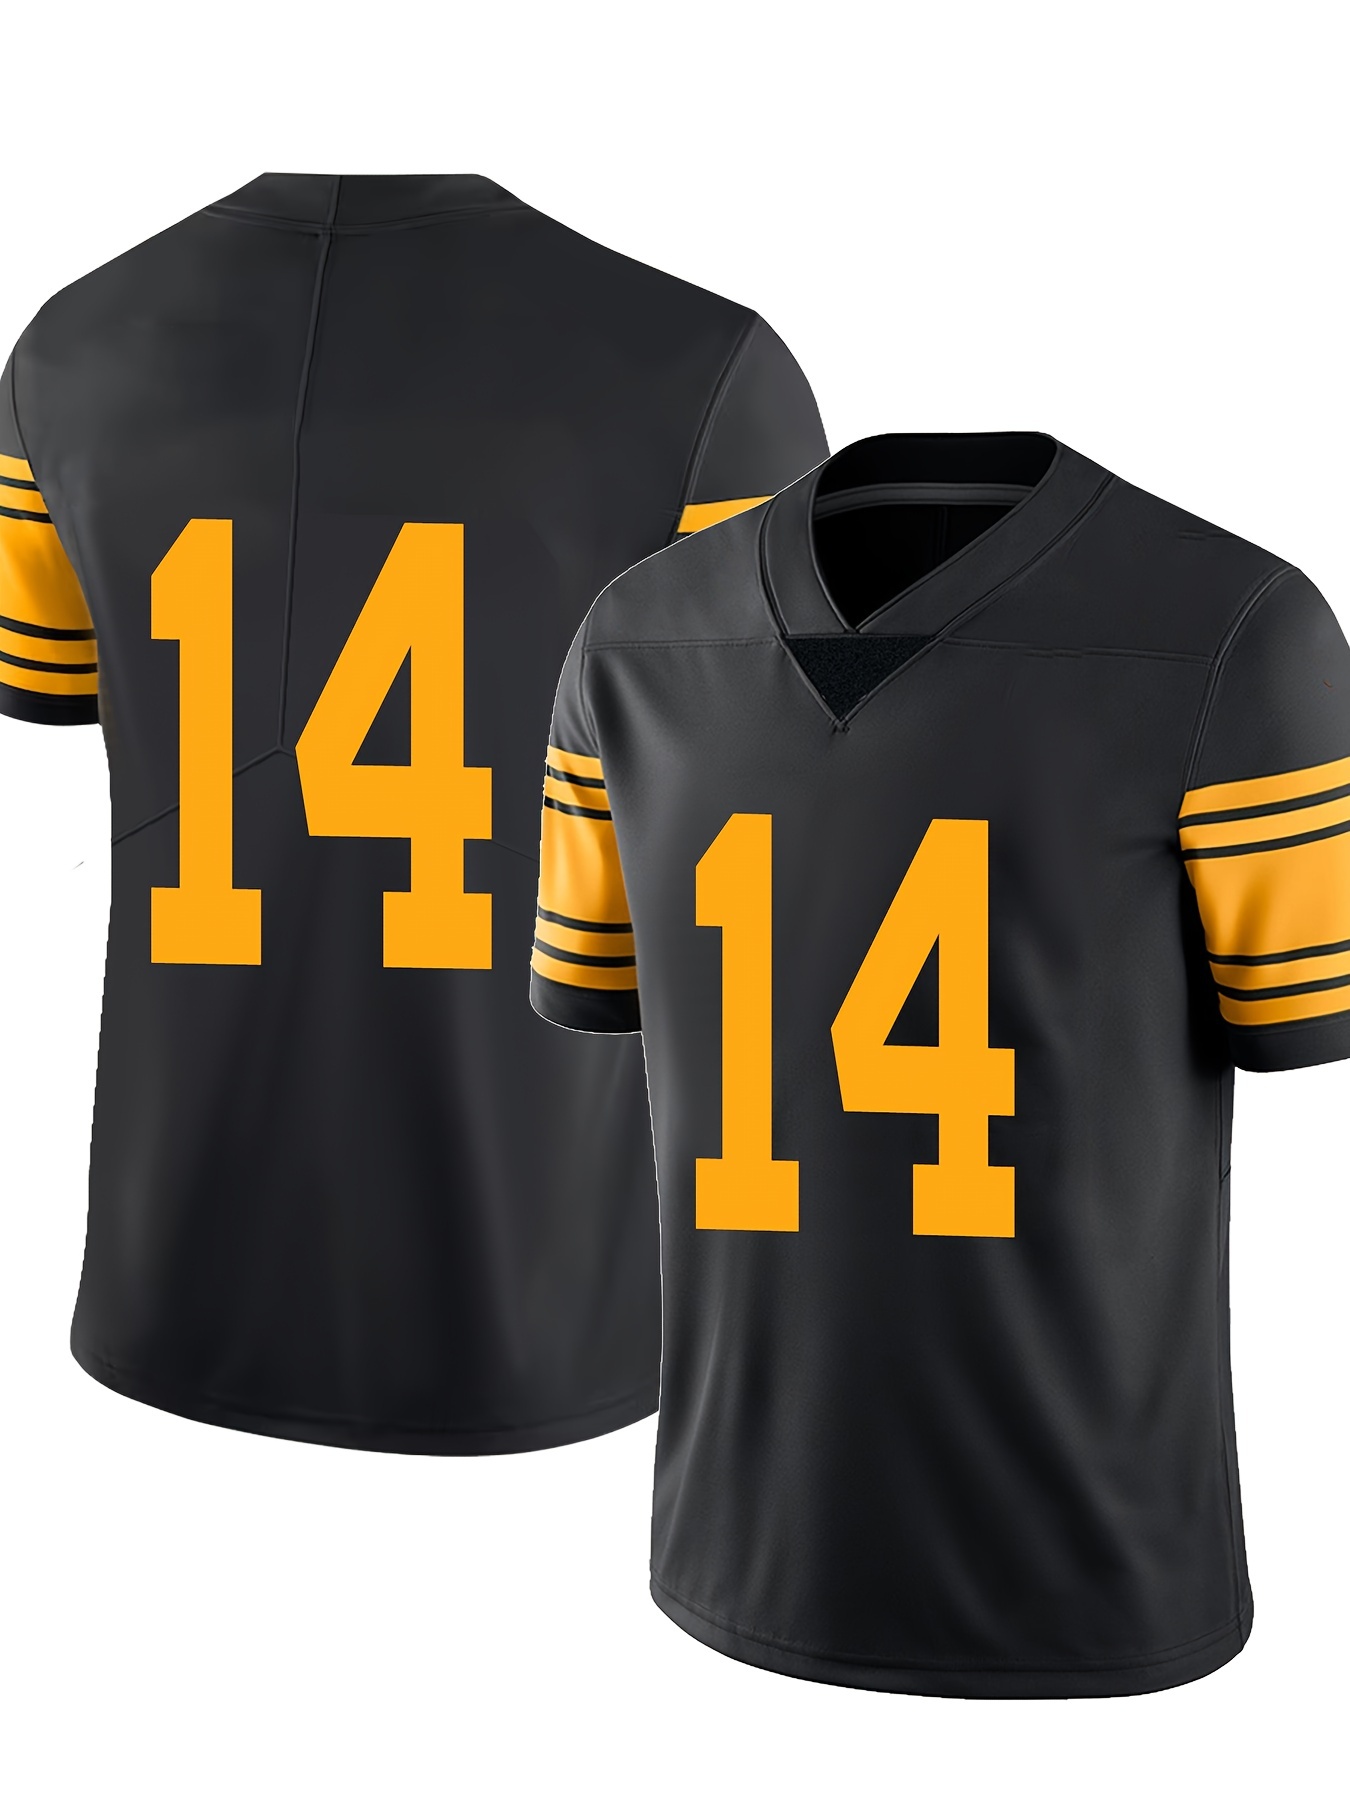 Stylish American Football Jersey for Unisex Use 